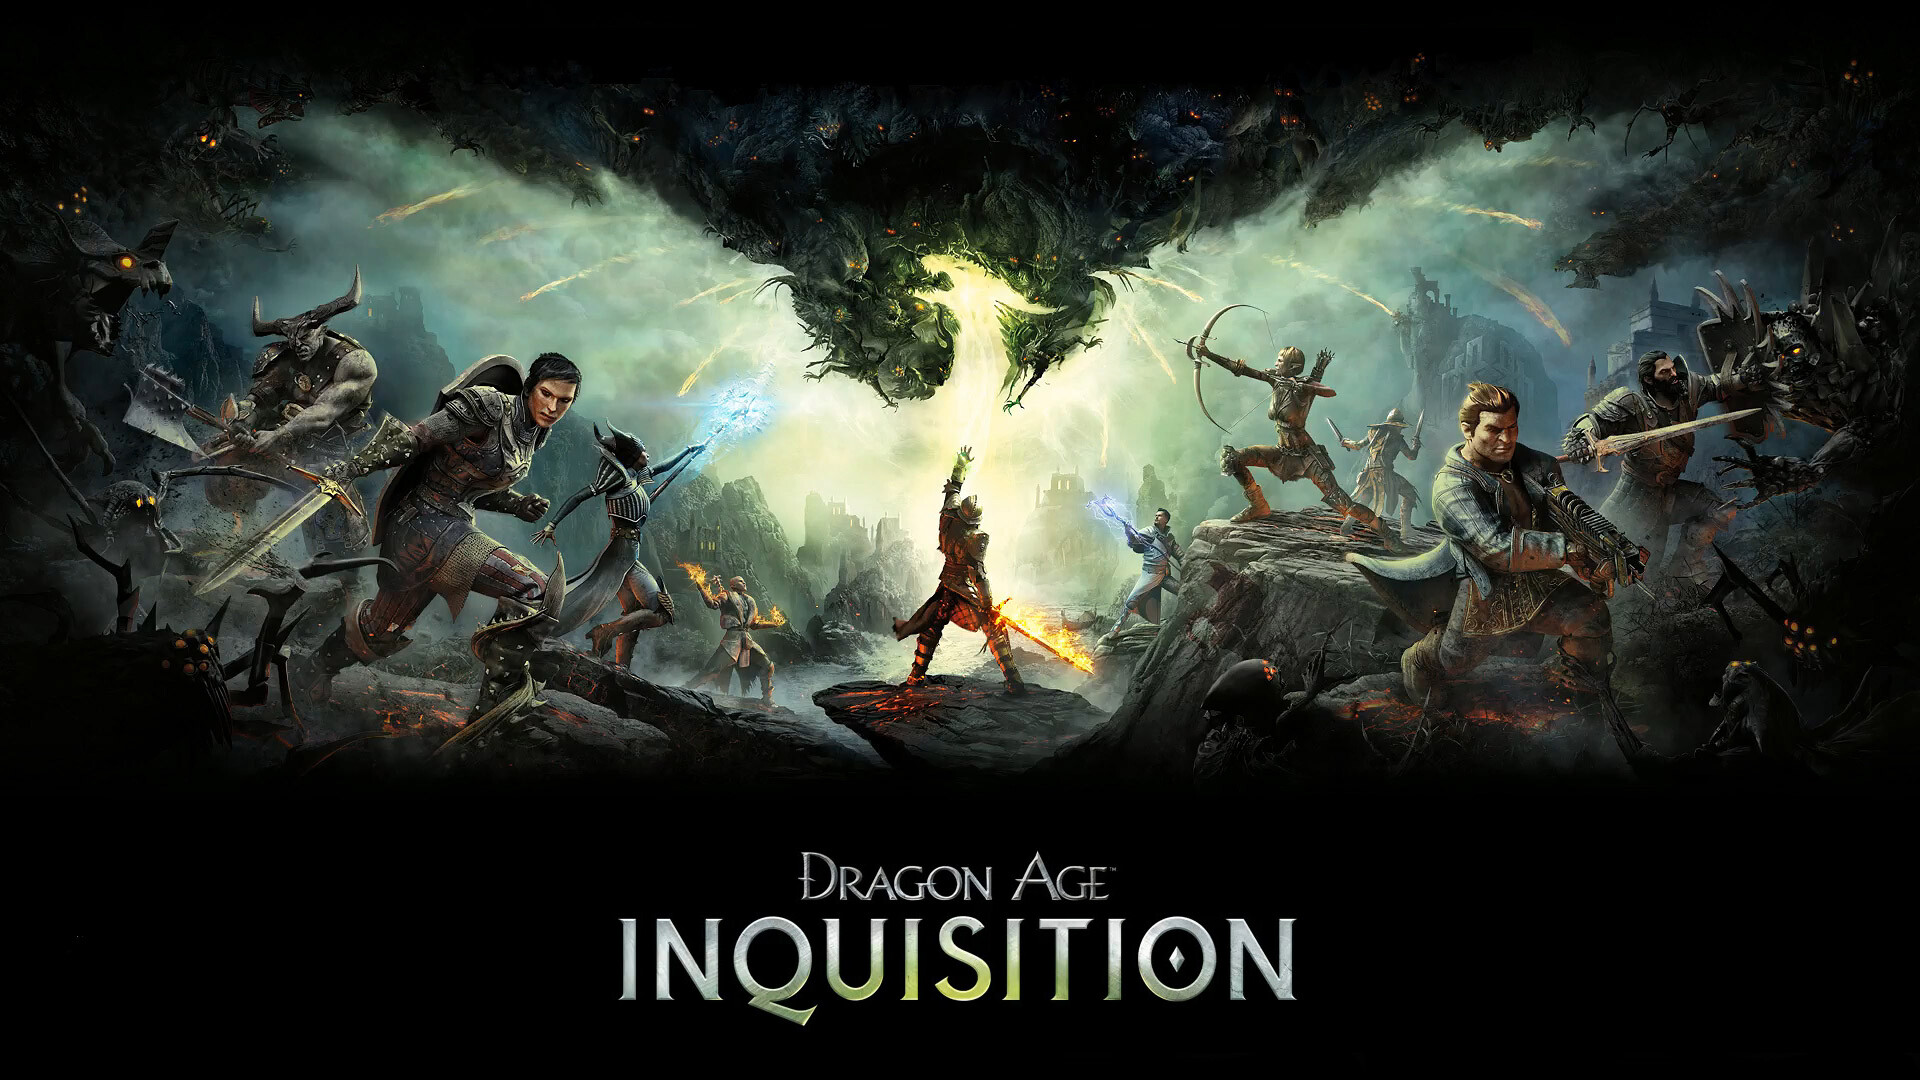 45+ Dragon Age Inquisition Wallpapers: HD, 4K, 5K for PC and Mobile |  Download free images for iPhone, Android